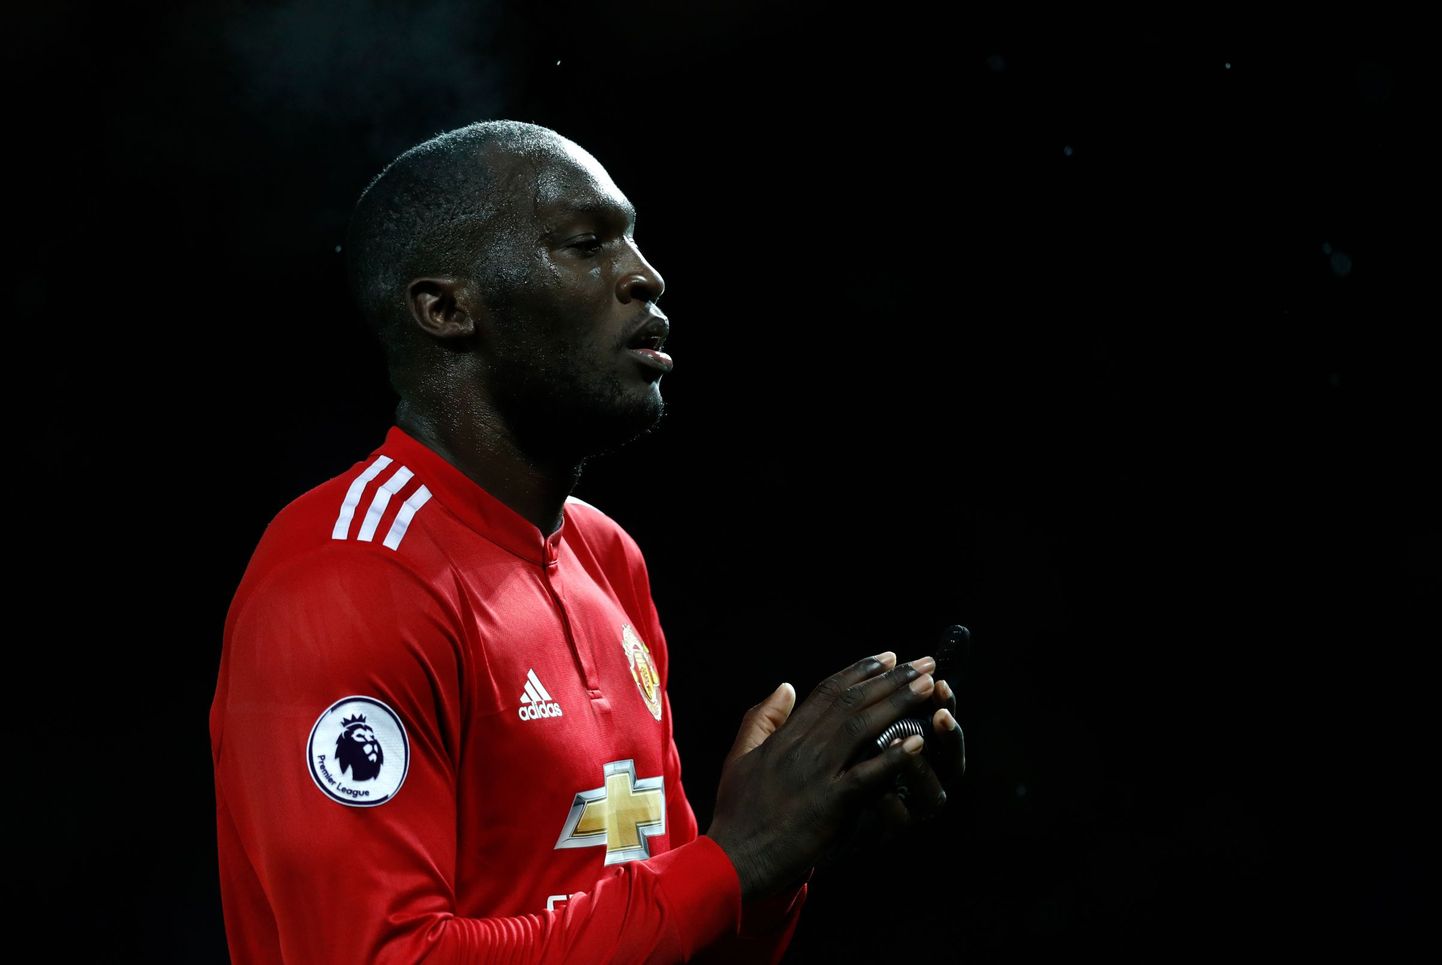 Manchester United's Romelu Lukaku reacts after the final whistle during the Premier League match at Old Trafford, Manchester.